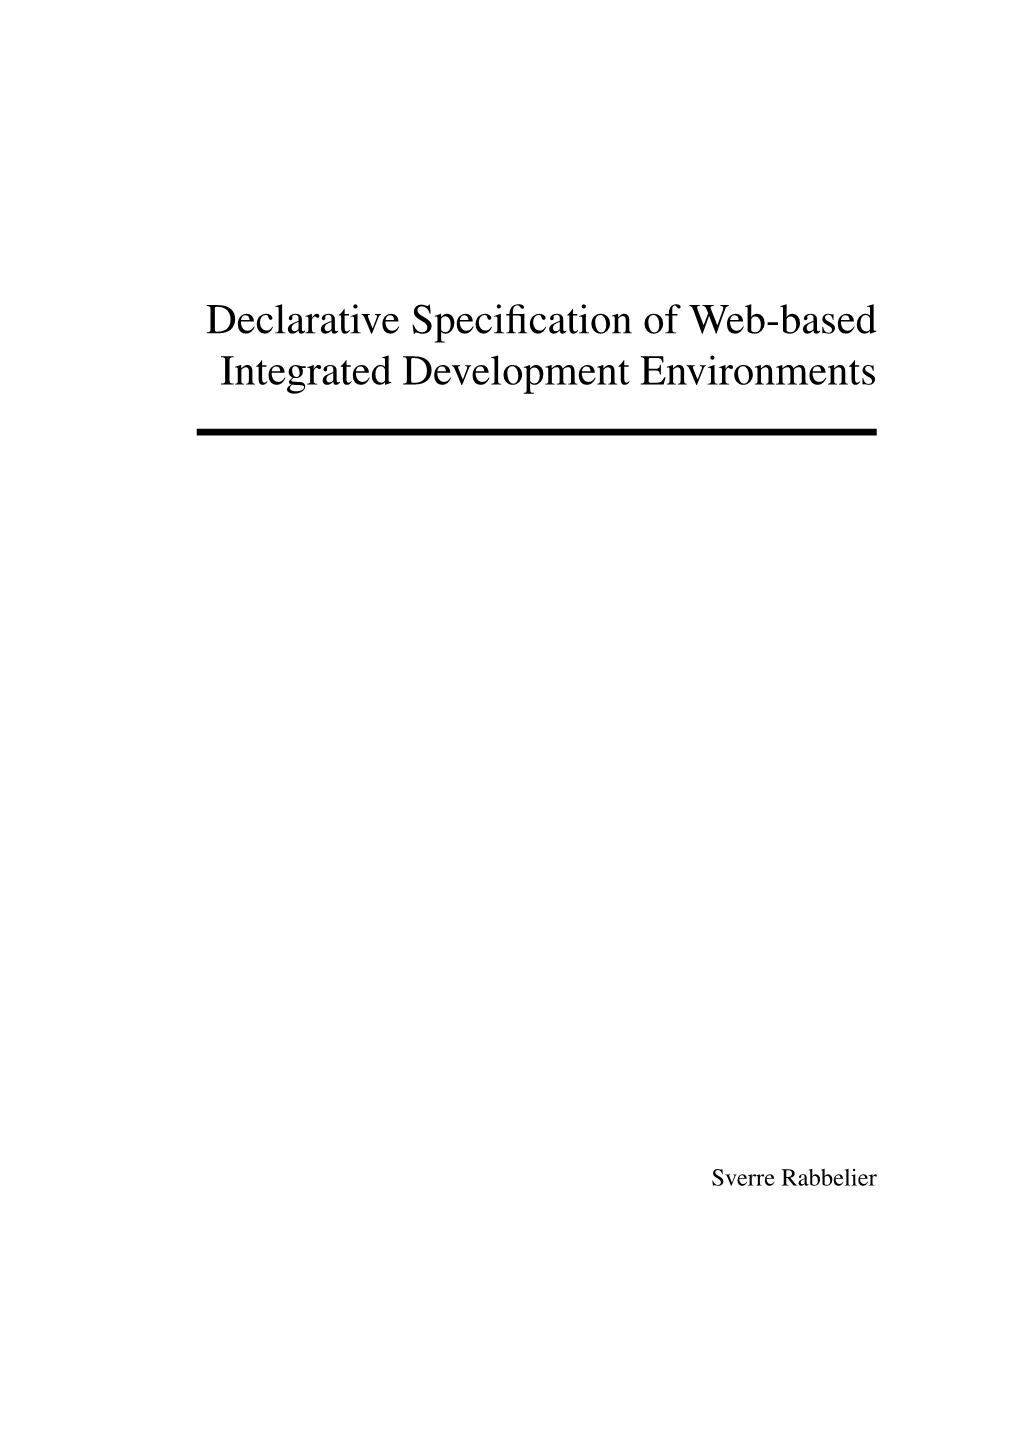 Declarative Specification of Web-Based Integrated